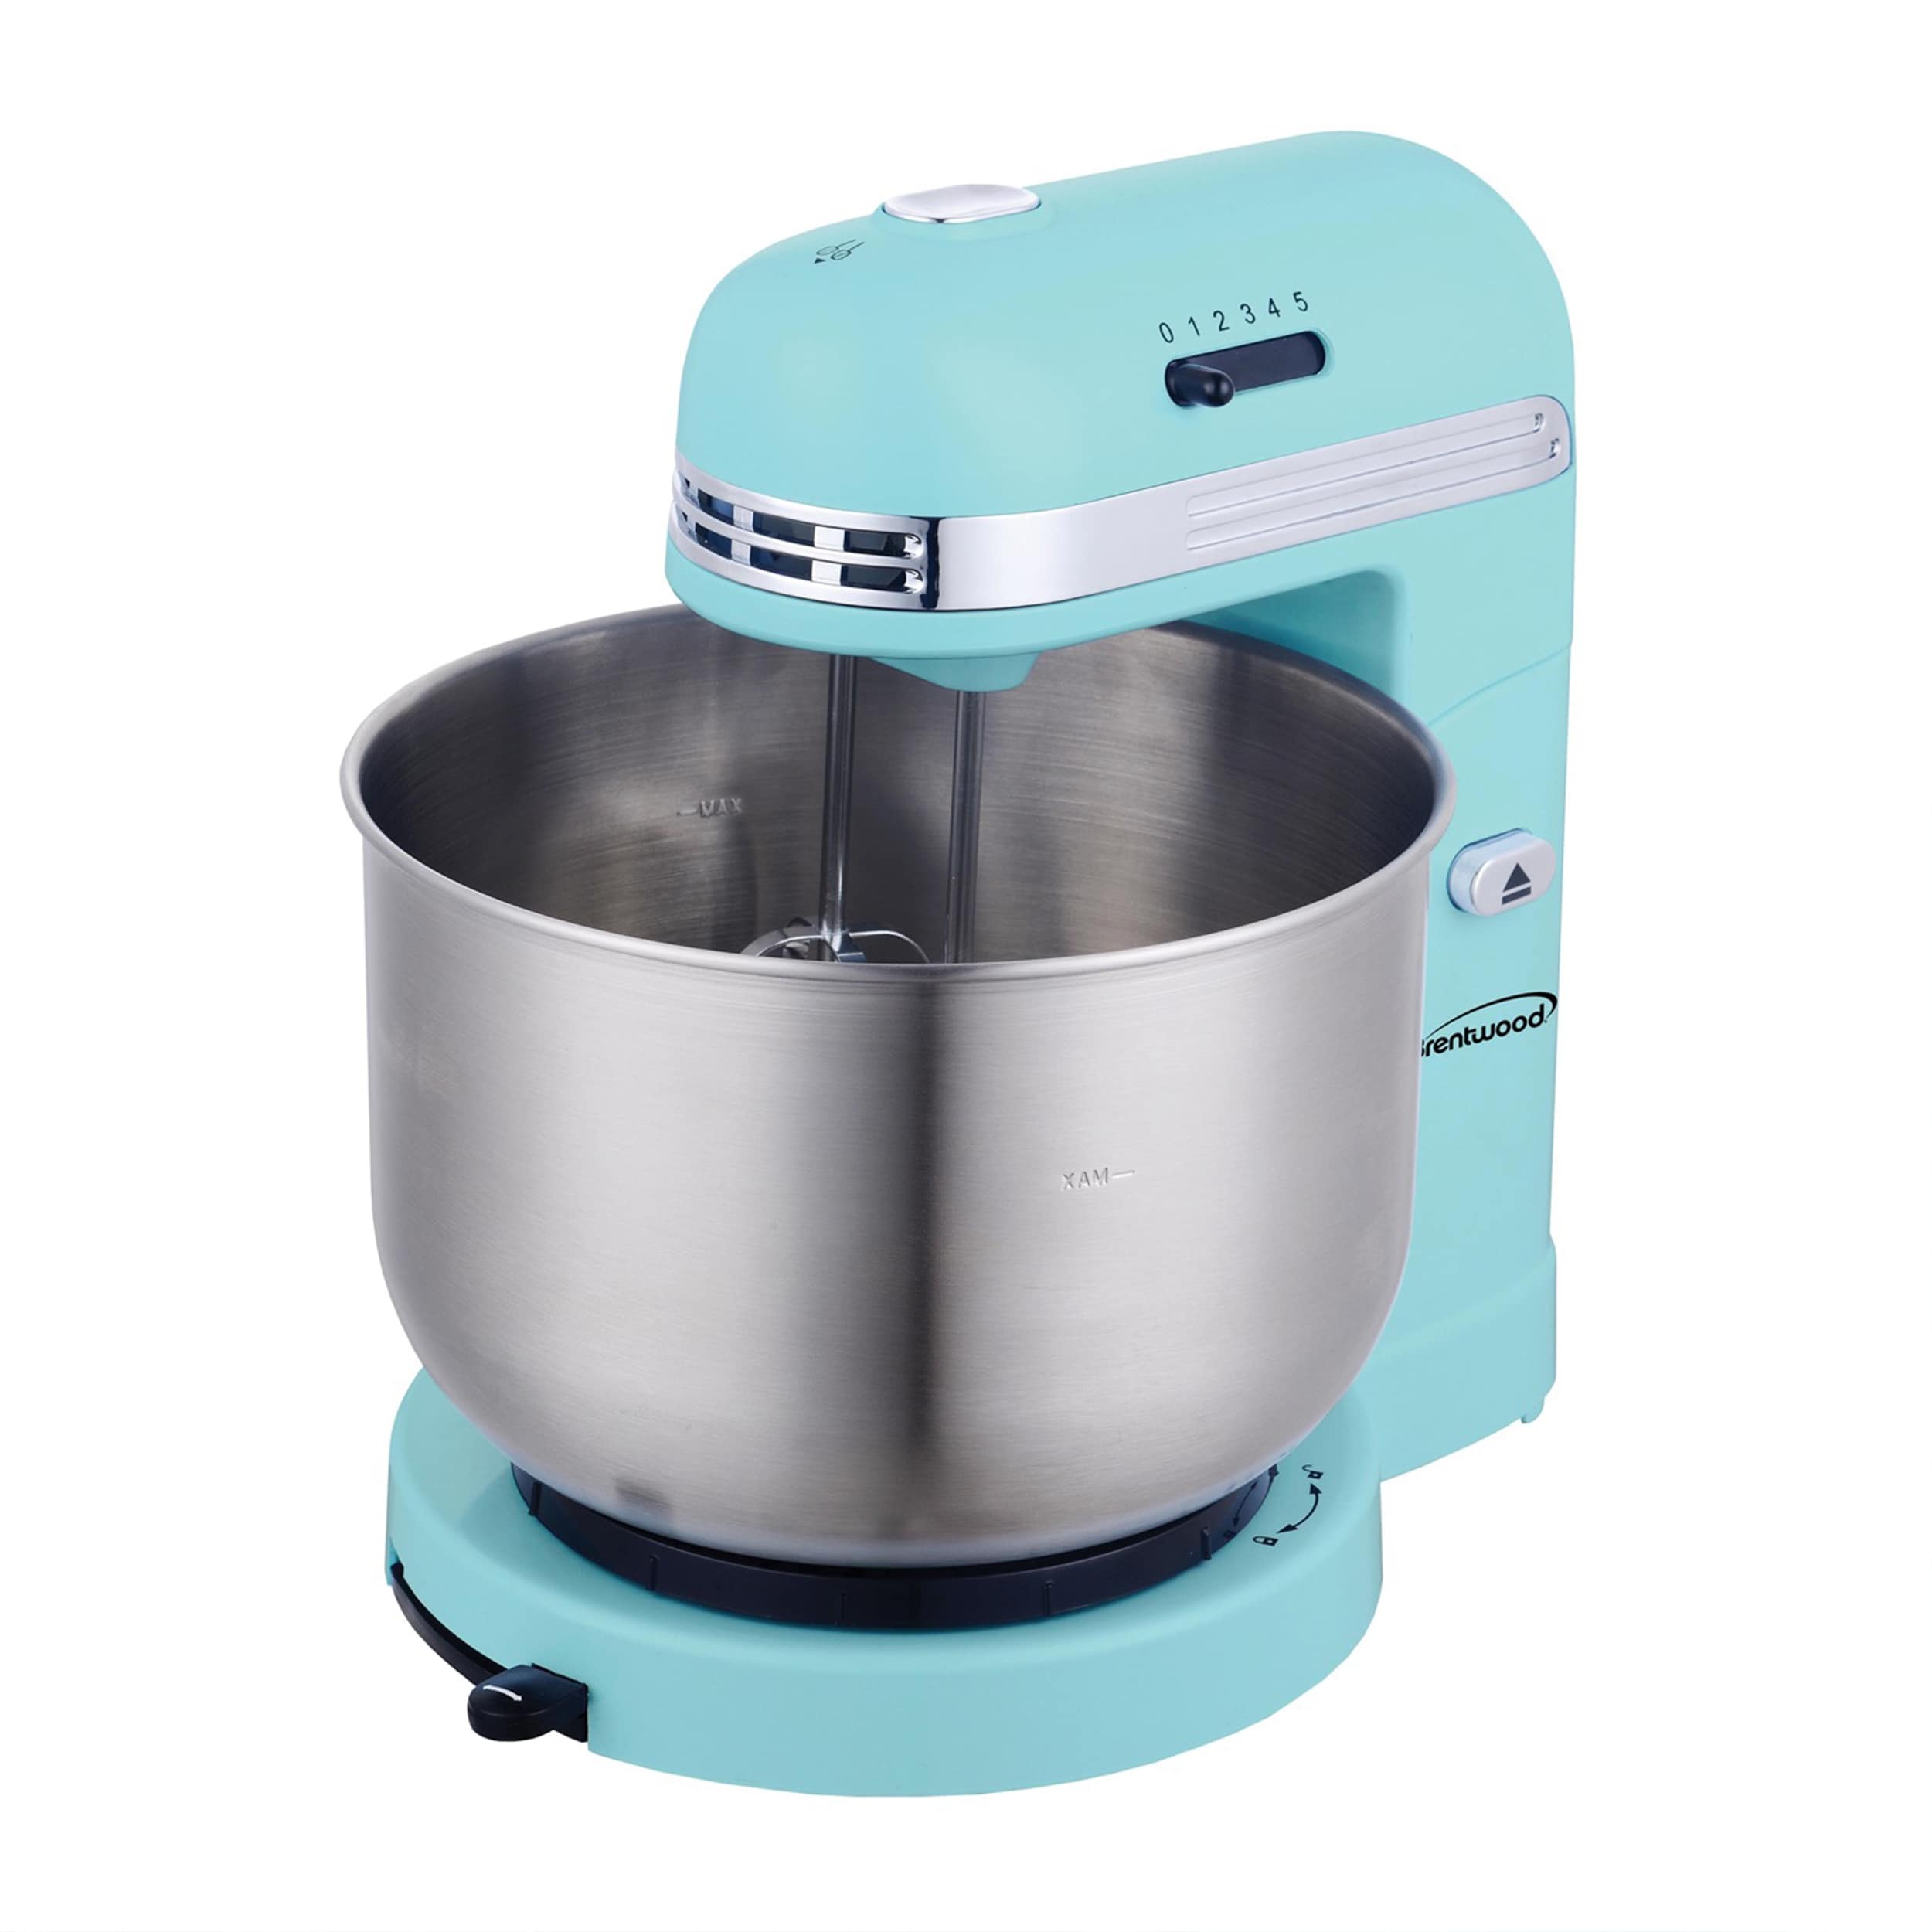 https://ak1.ostkcdn.com/images/products/is/images/direct/cfa06b4f076f64ab7d59ccce67014f367e1a59a7/5-Speed-Stand-Mixer-with-14-Cup-Stainless-Steel-Mixing-Bowl-in-Birds-Egg.jpg